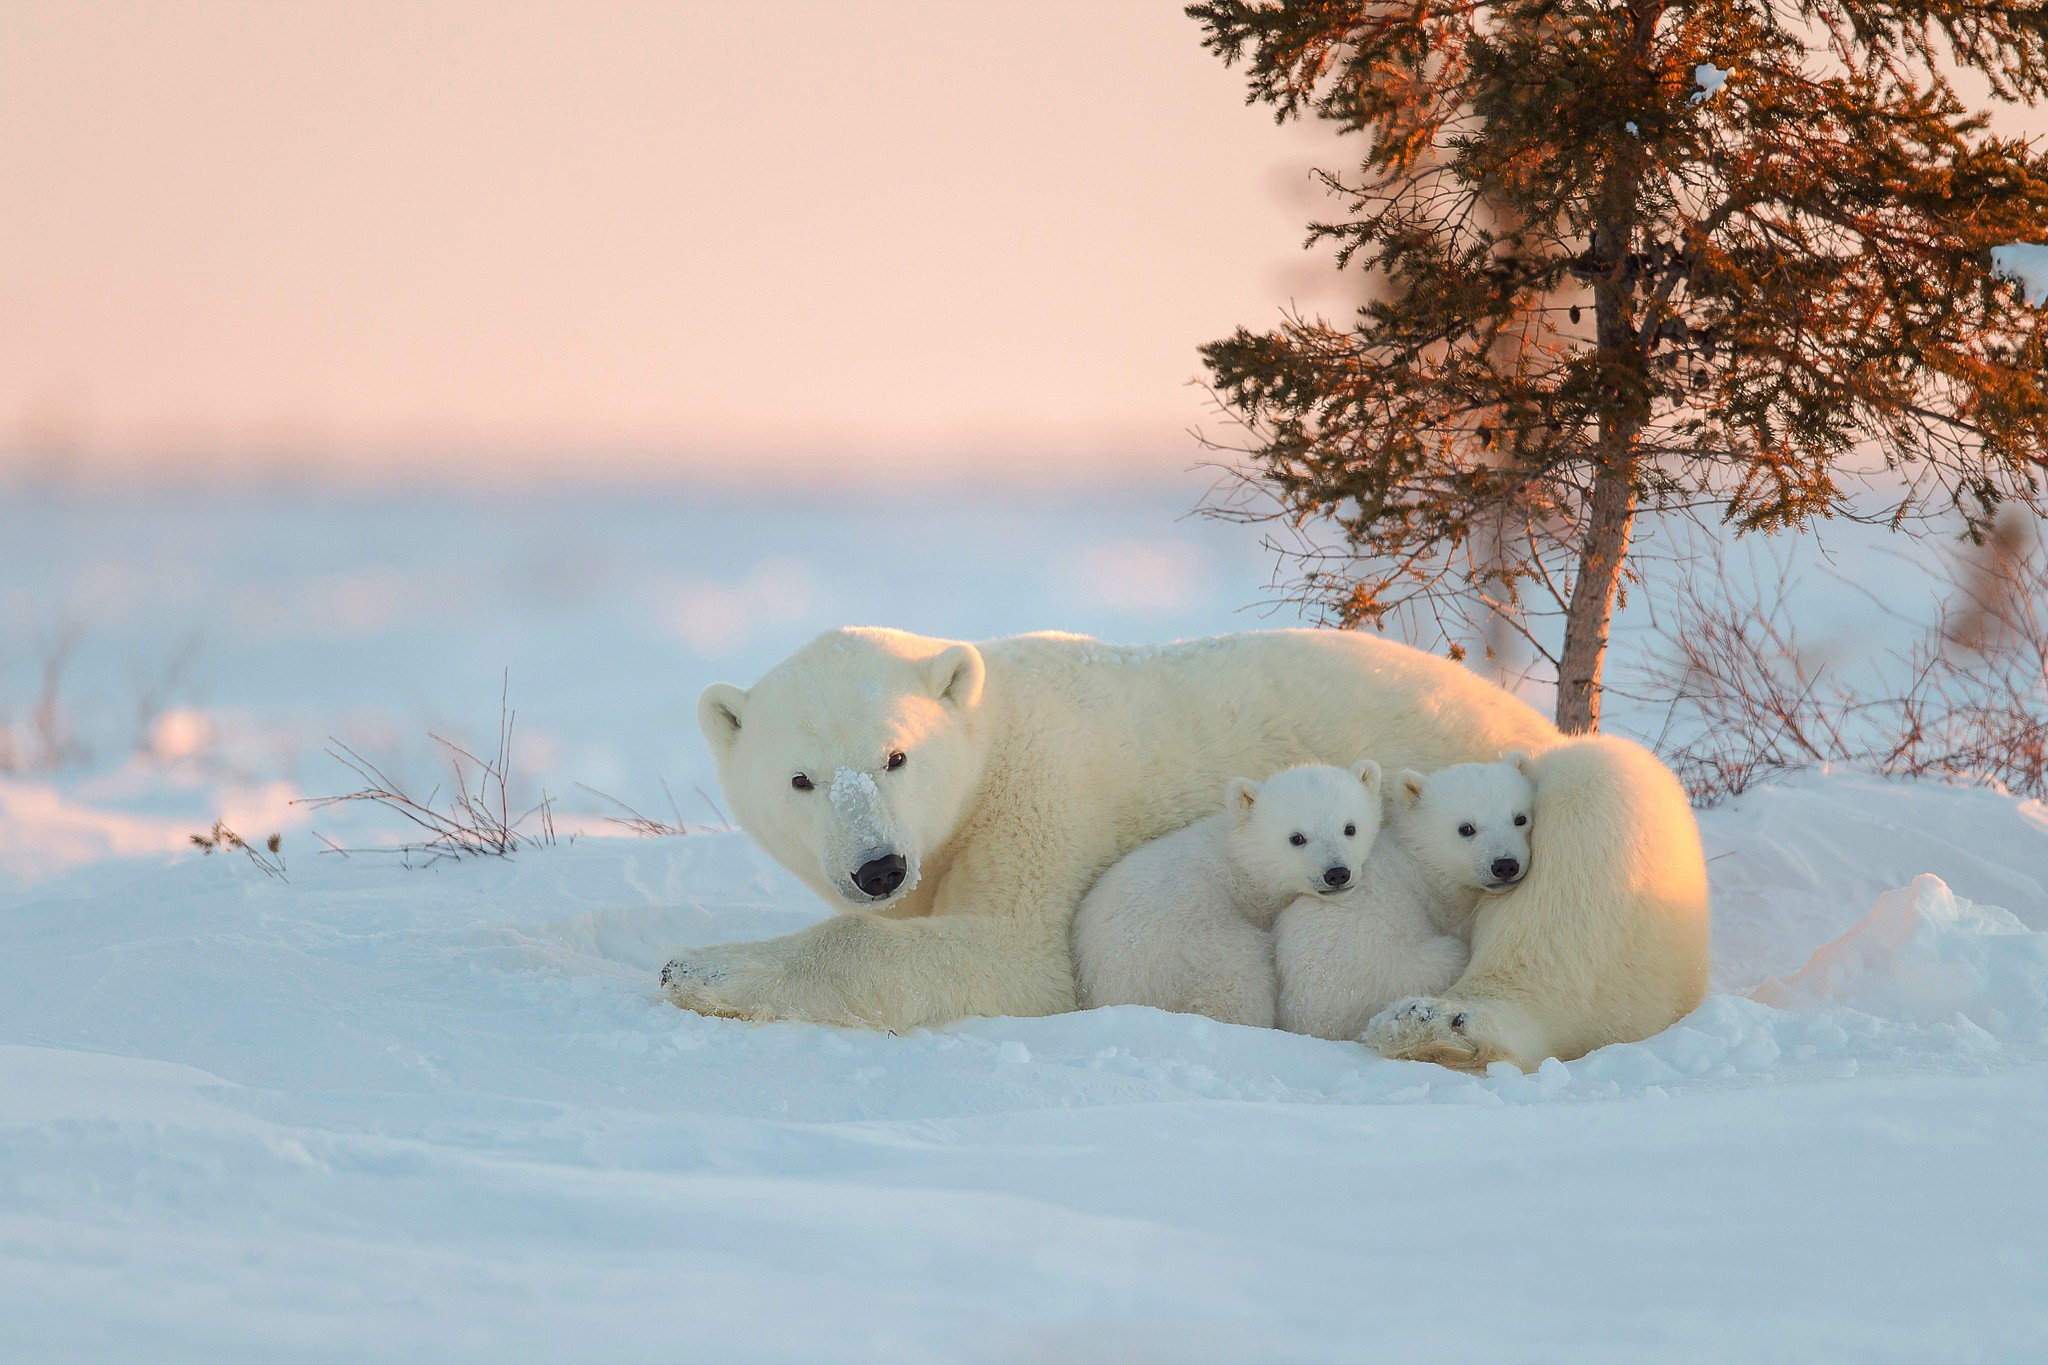 Mother And Cubs